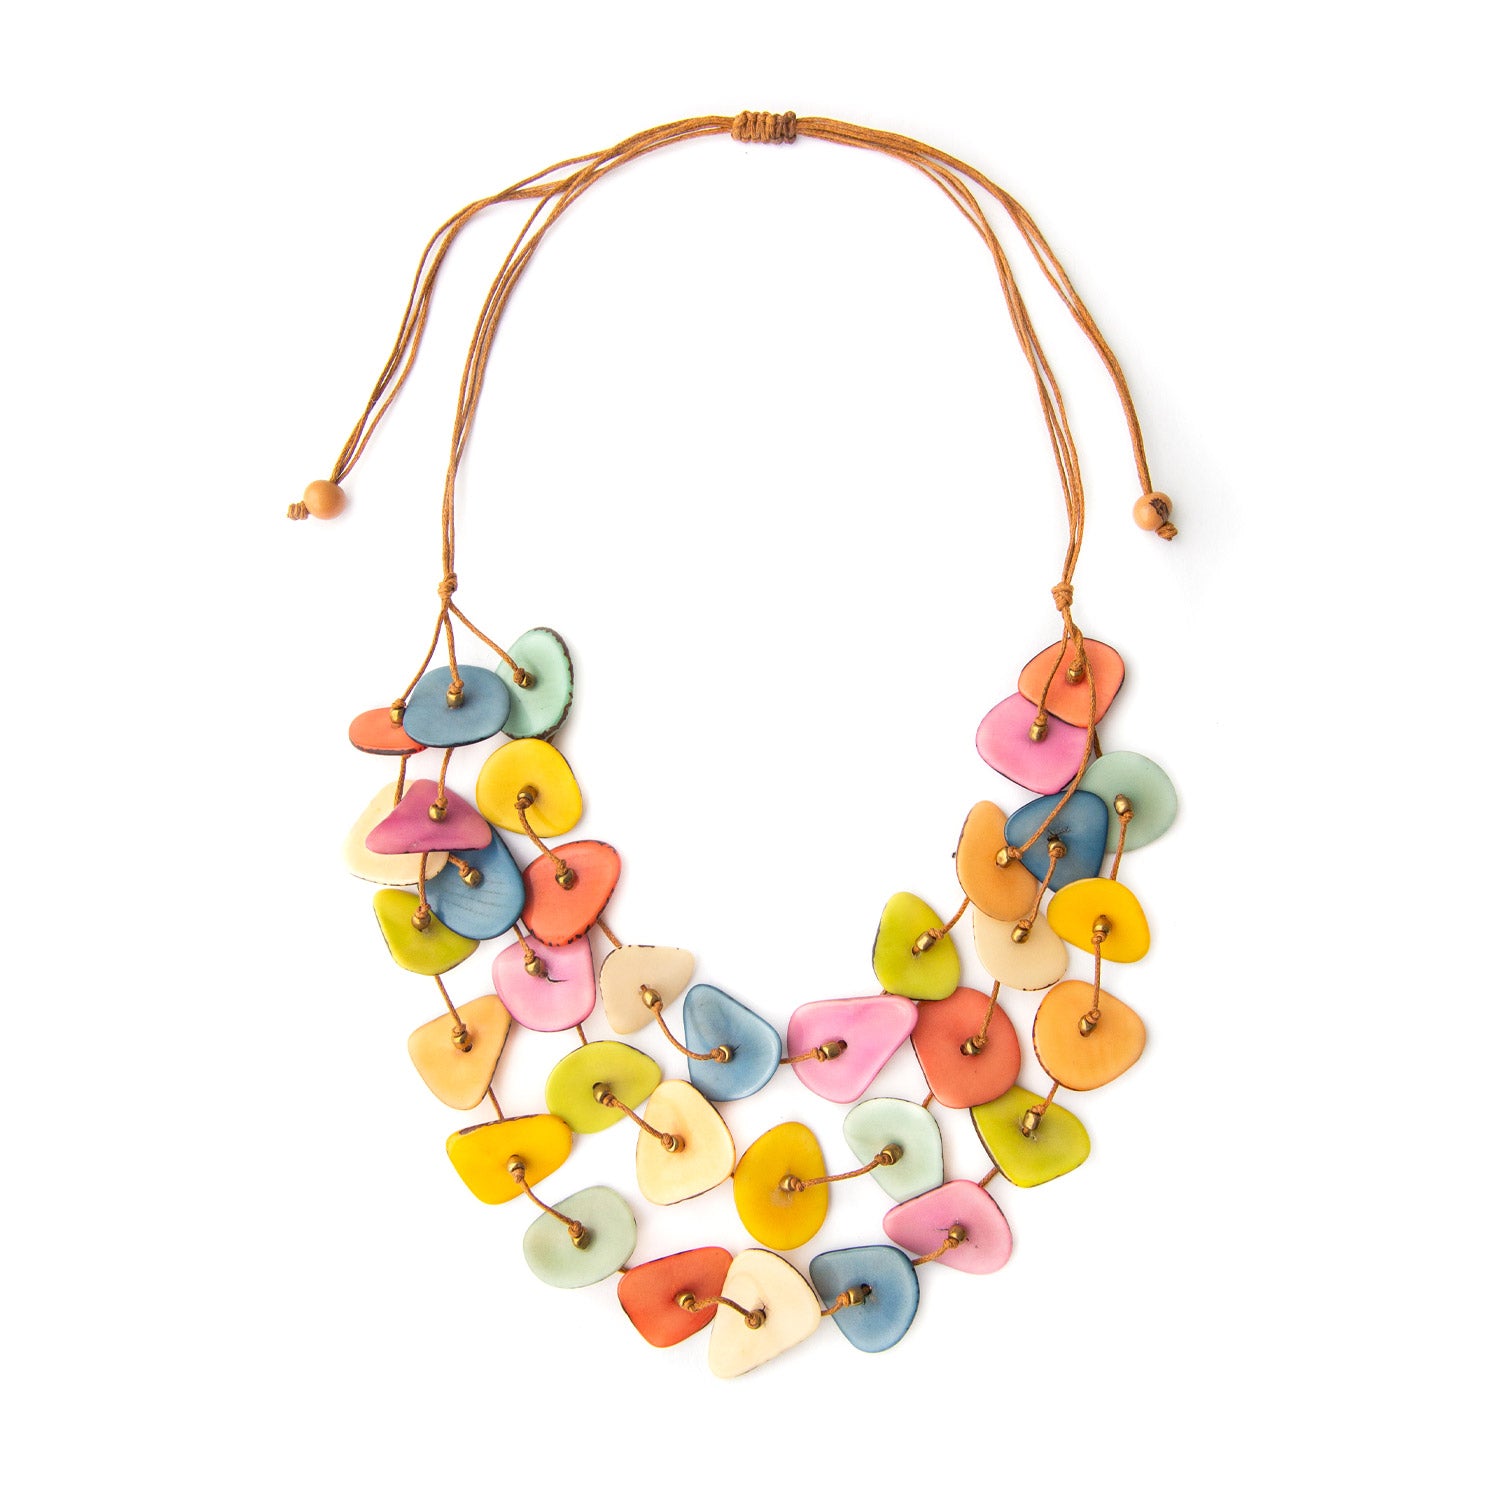 Mabel Necklace